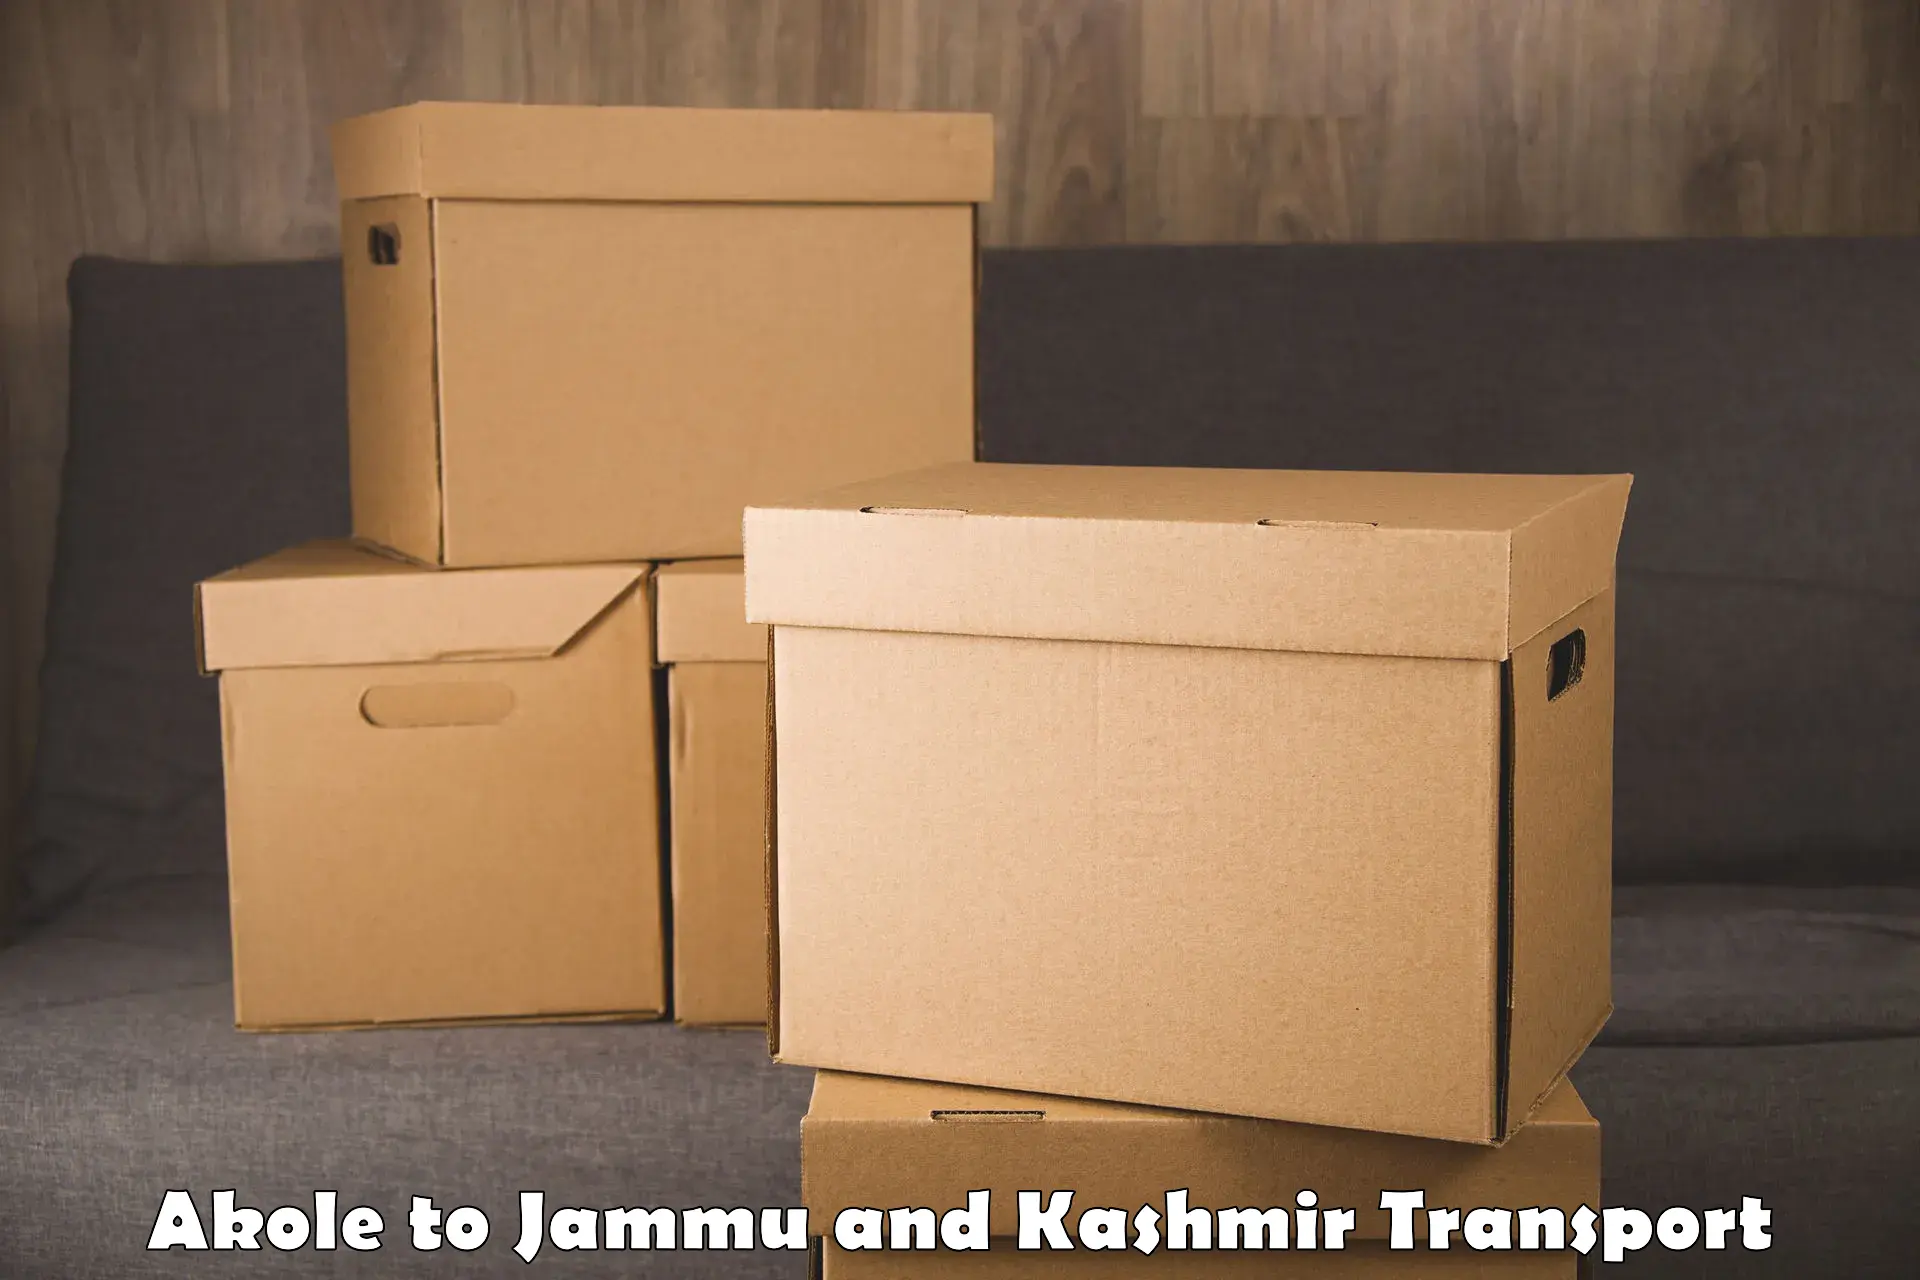 Container transportation services Akole to Budgam